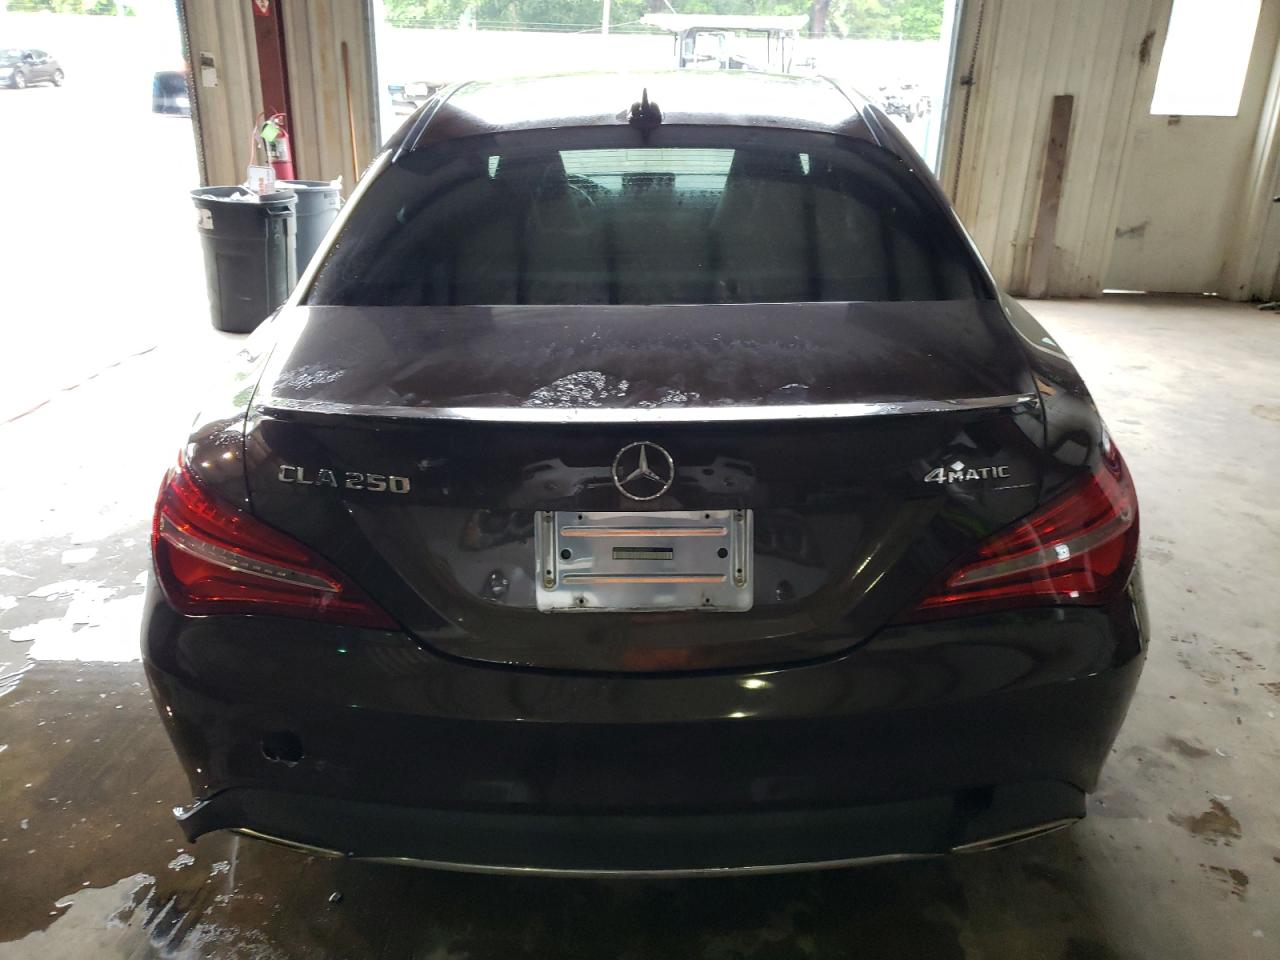 WDDSJ4GB1JN****** Salvage and Repairable 2018 Mercedes-Benz CLA-Class in Alabama State